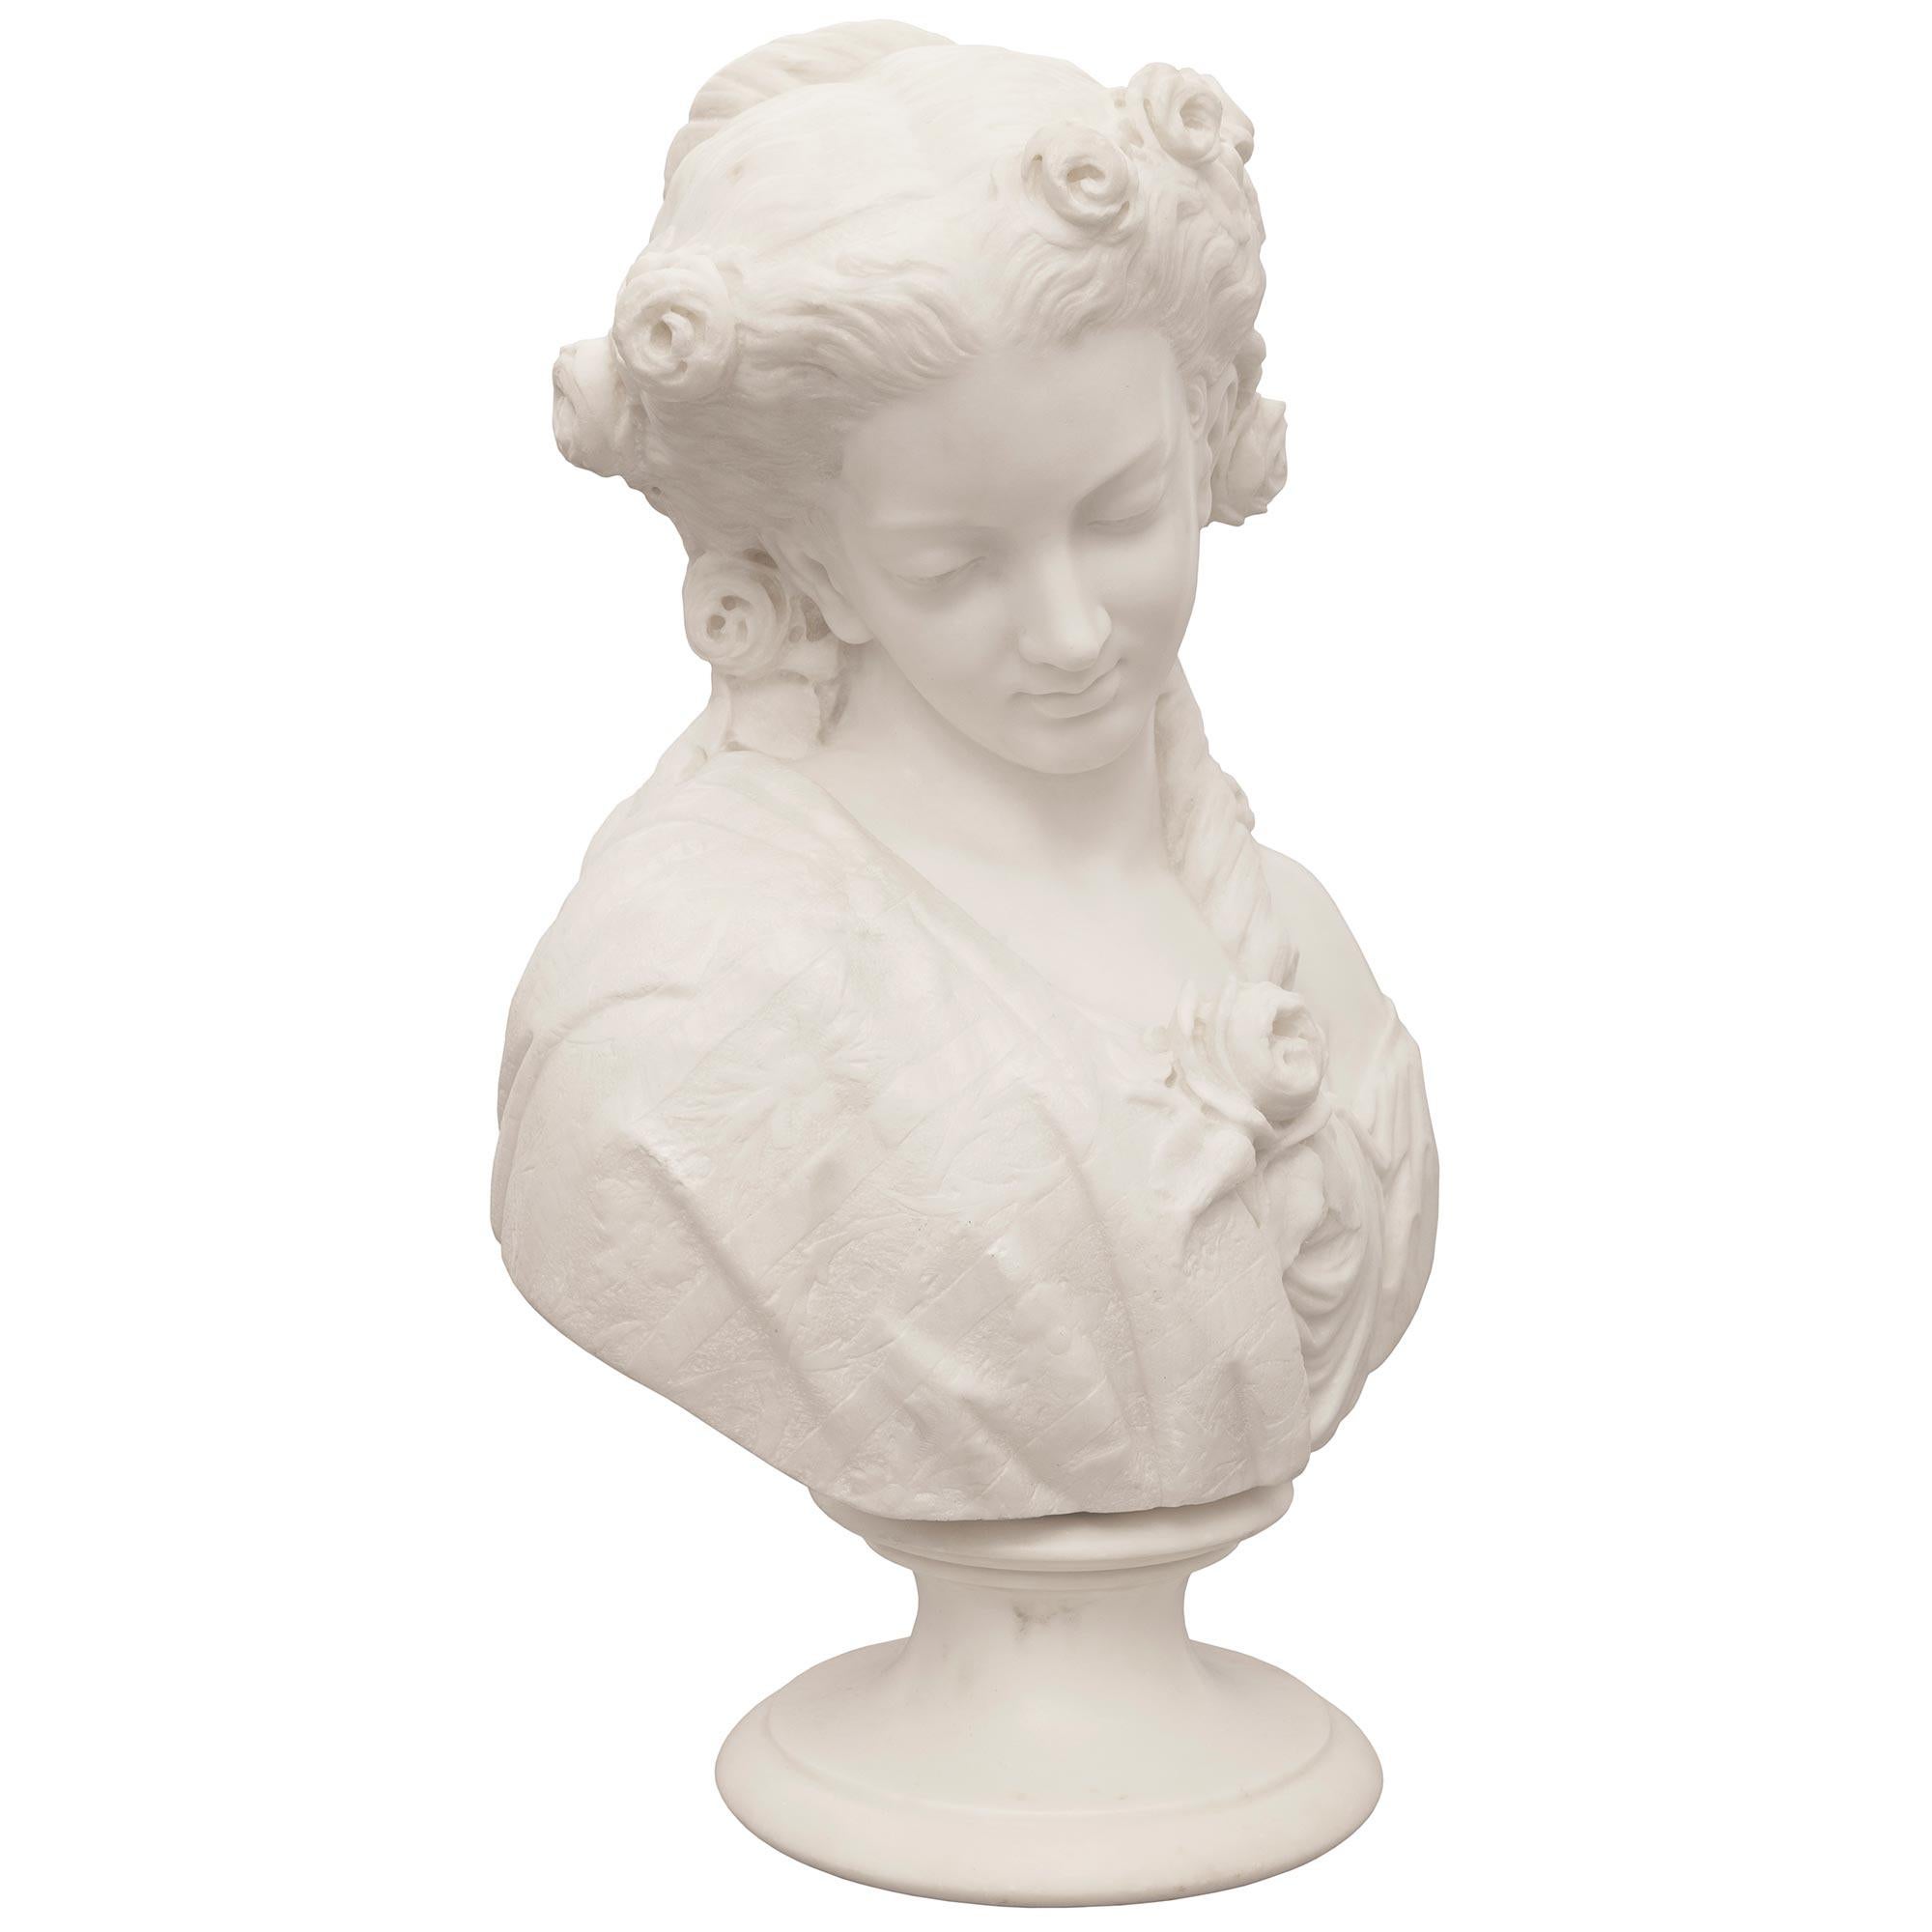 A Italian 19th century white Carrara marble bust signed Mencuri Firenze In Good Condition For Sale In West Palm Beach, FL